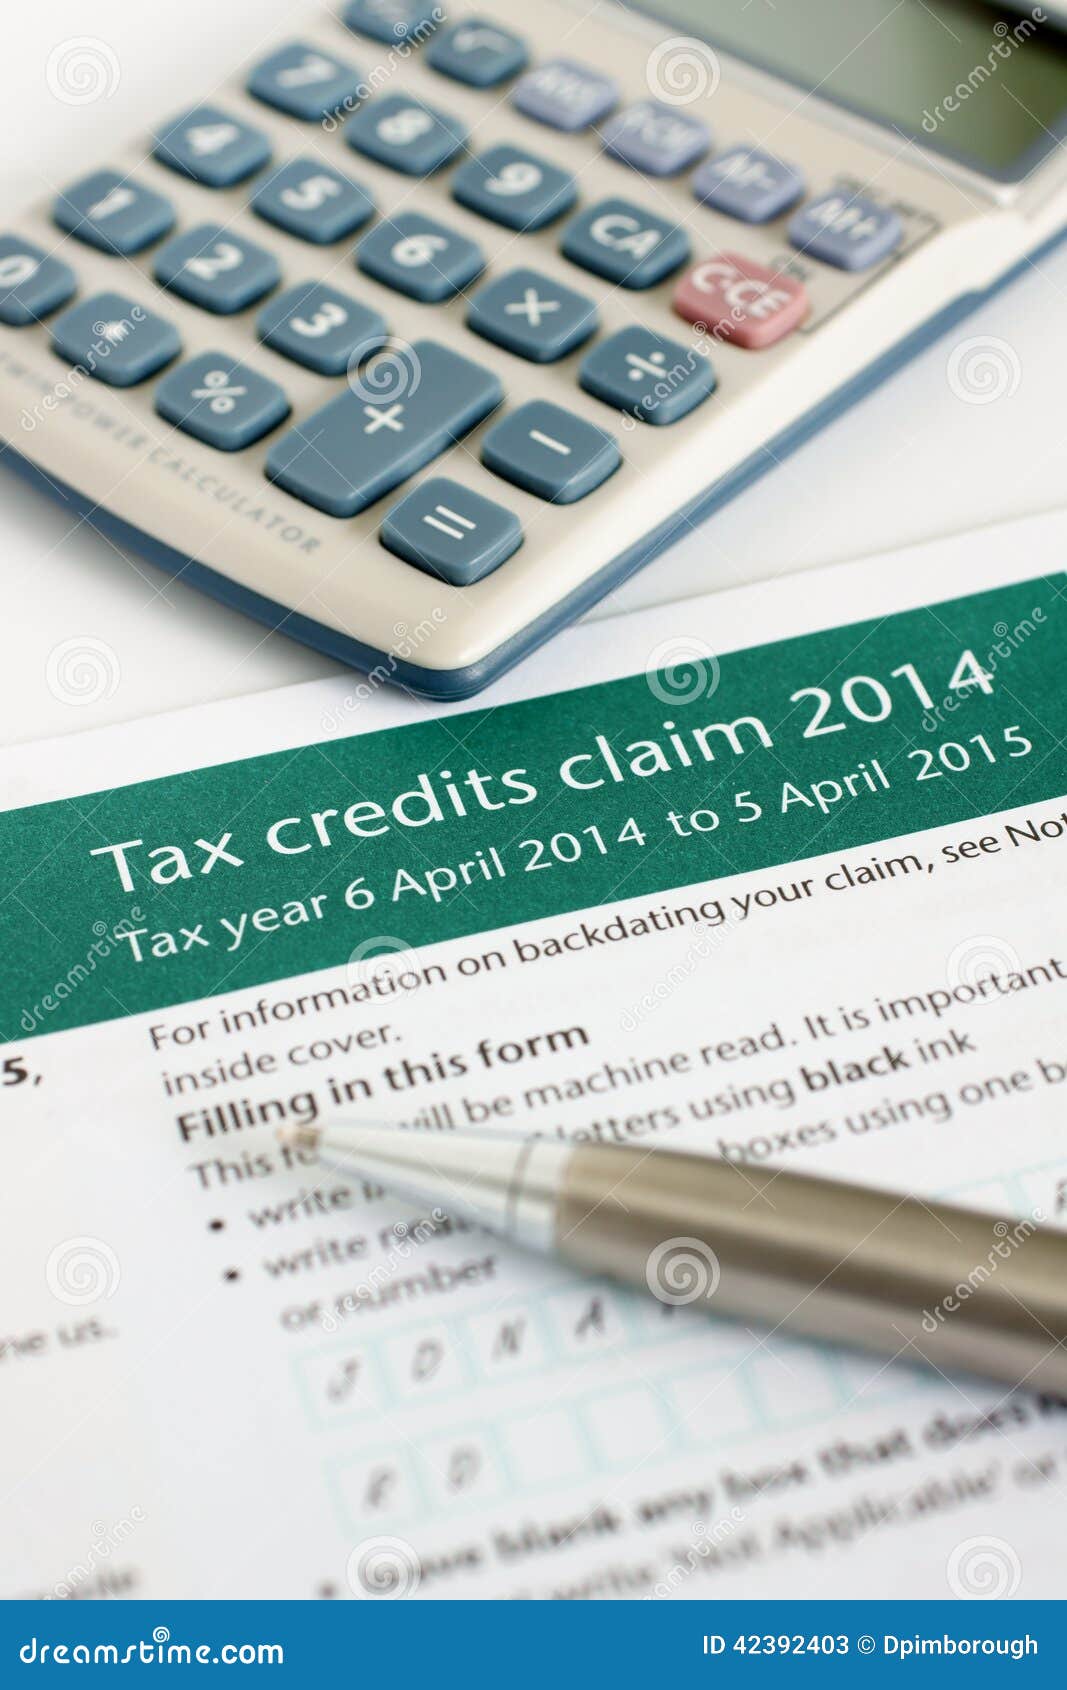 Apply For A Working Tax Credit